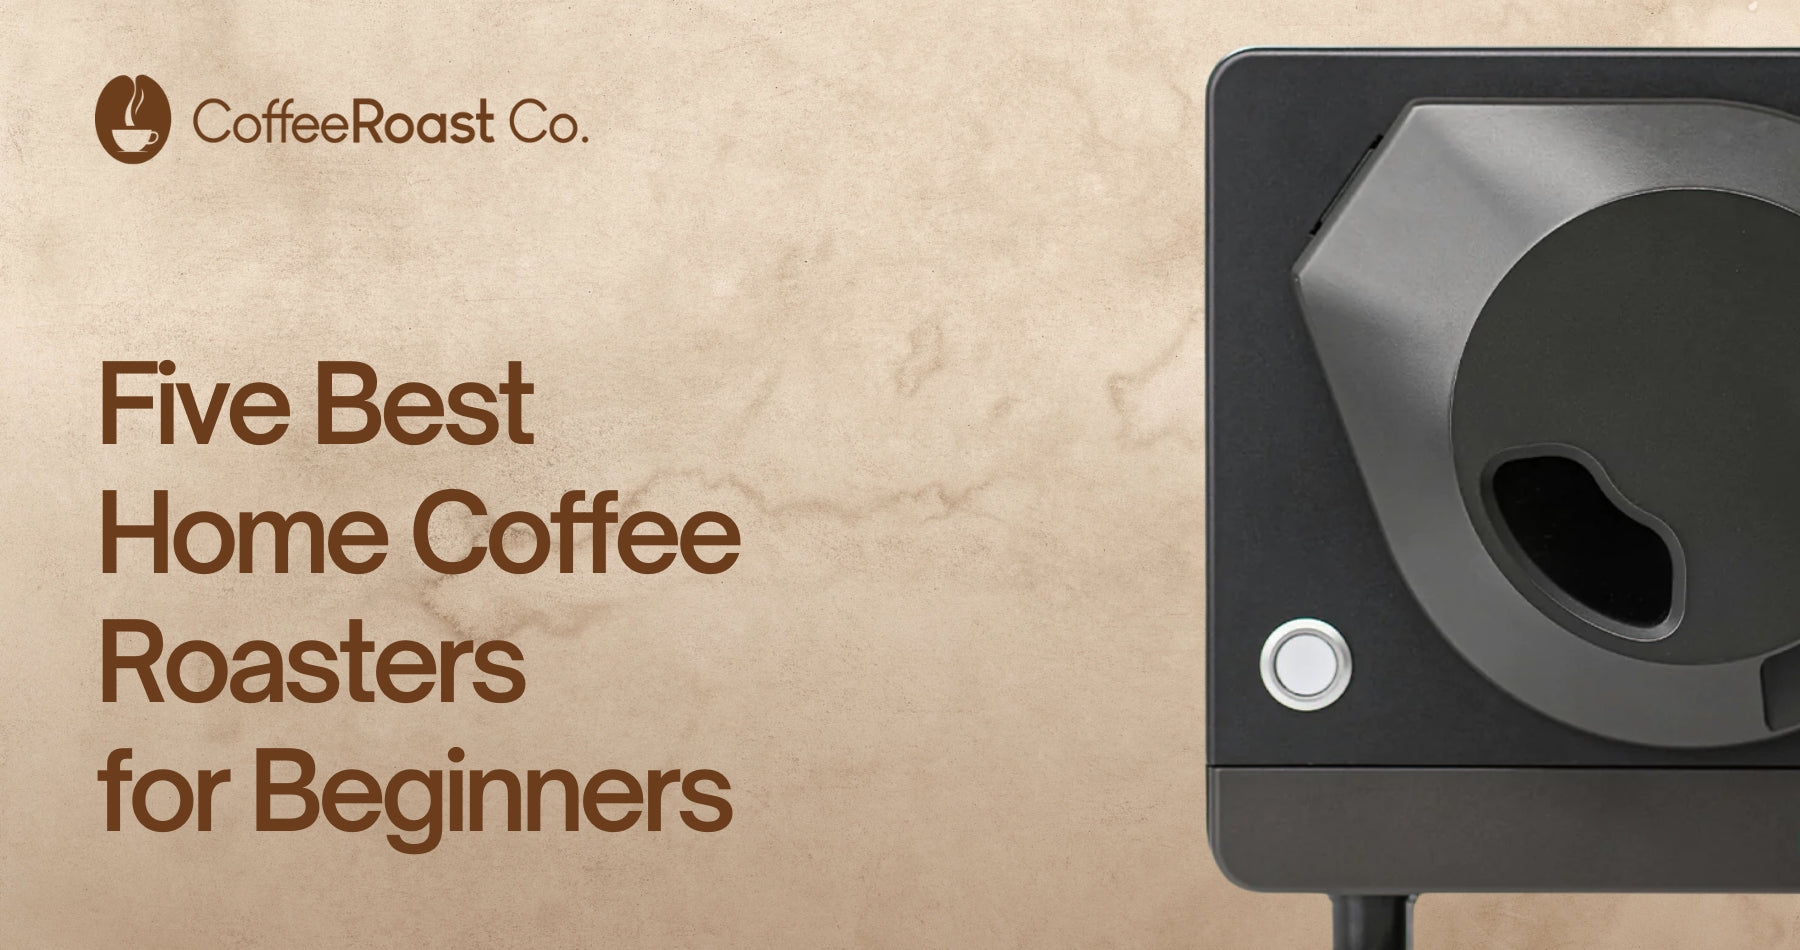 New to Coffee Roasting? Here's the Best Home Coffee Roasters For You.